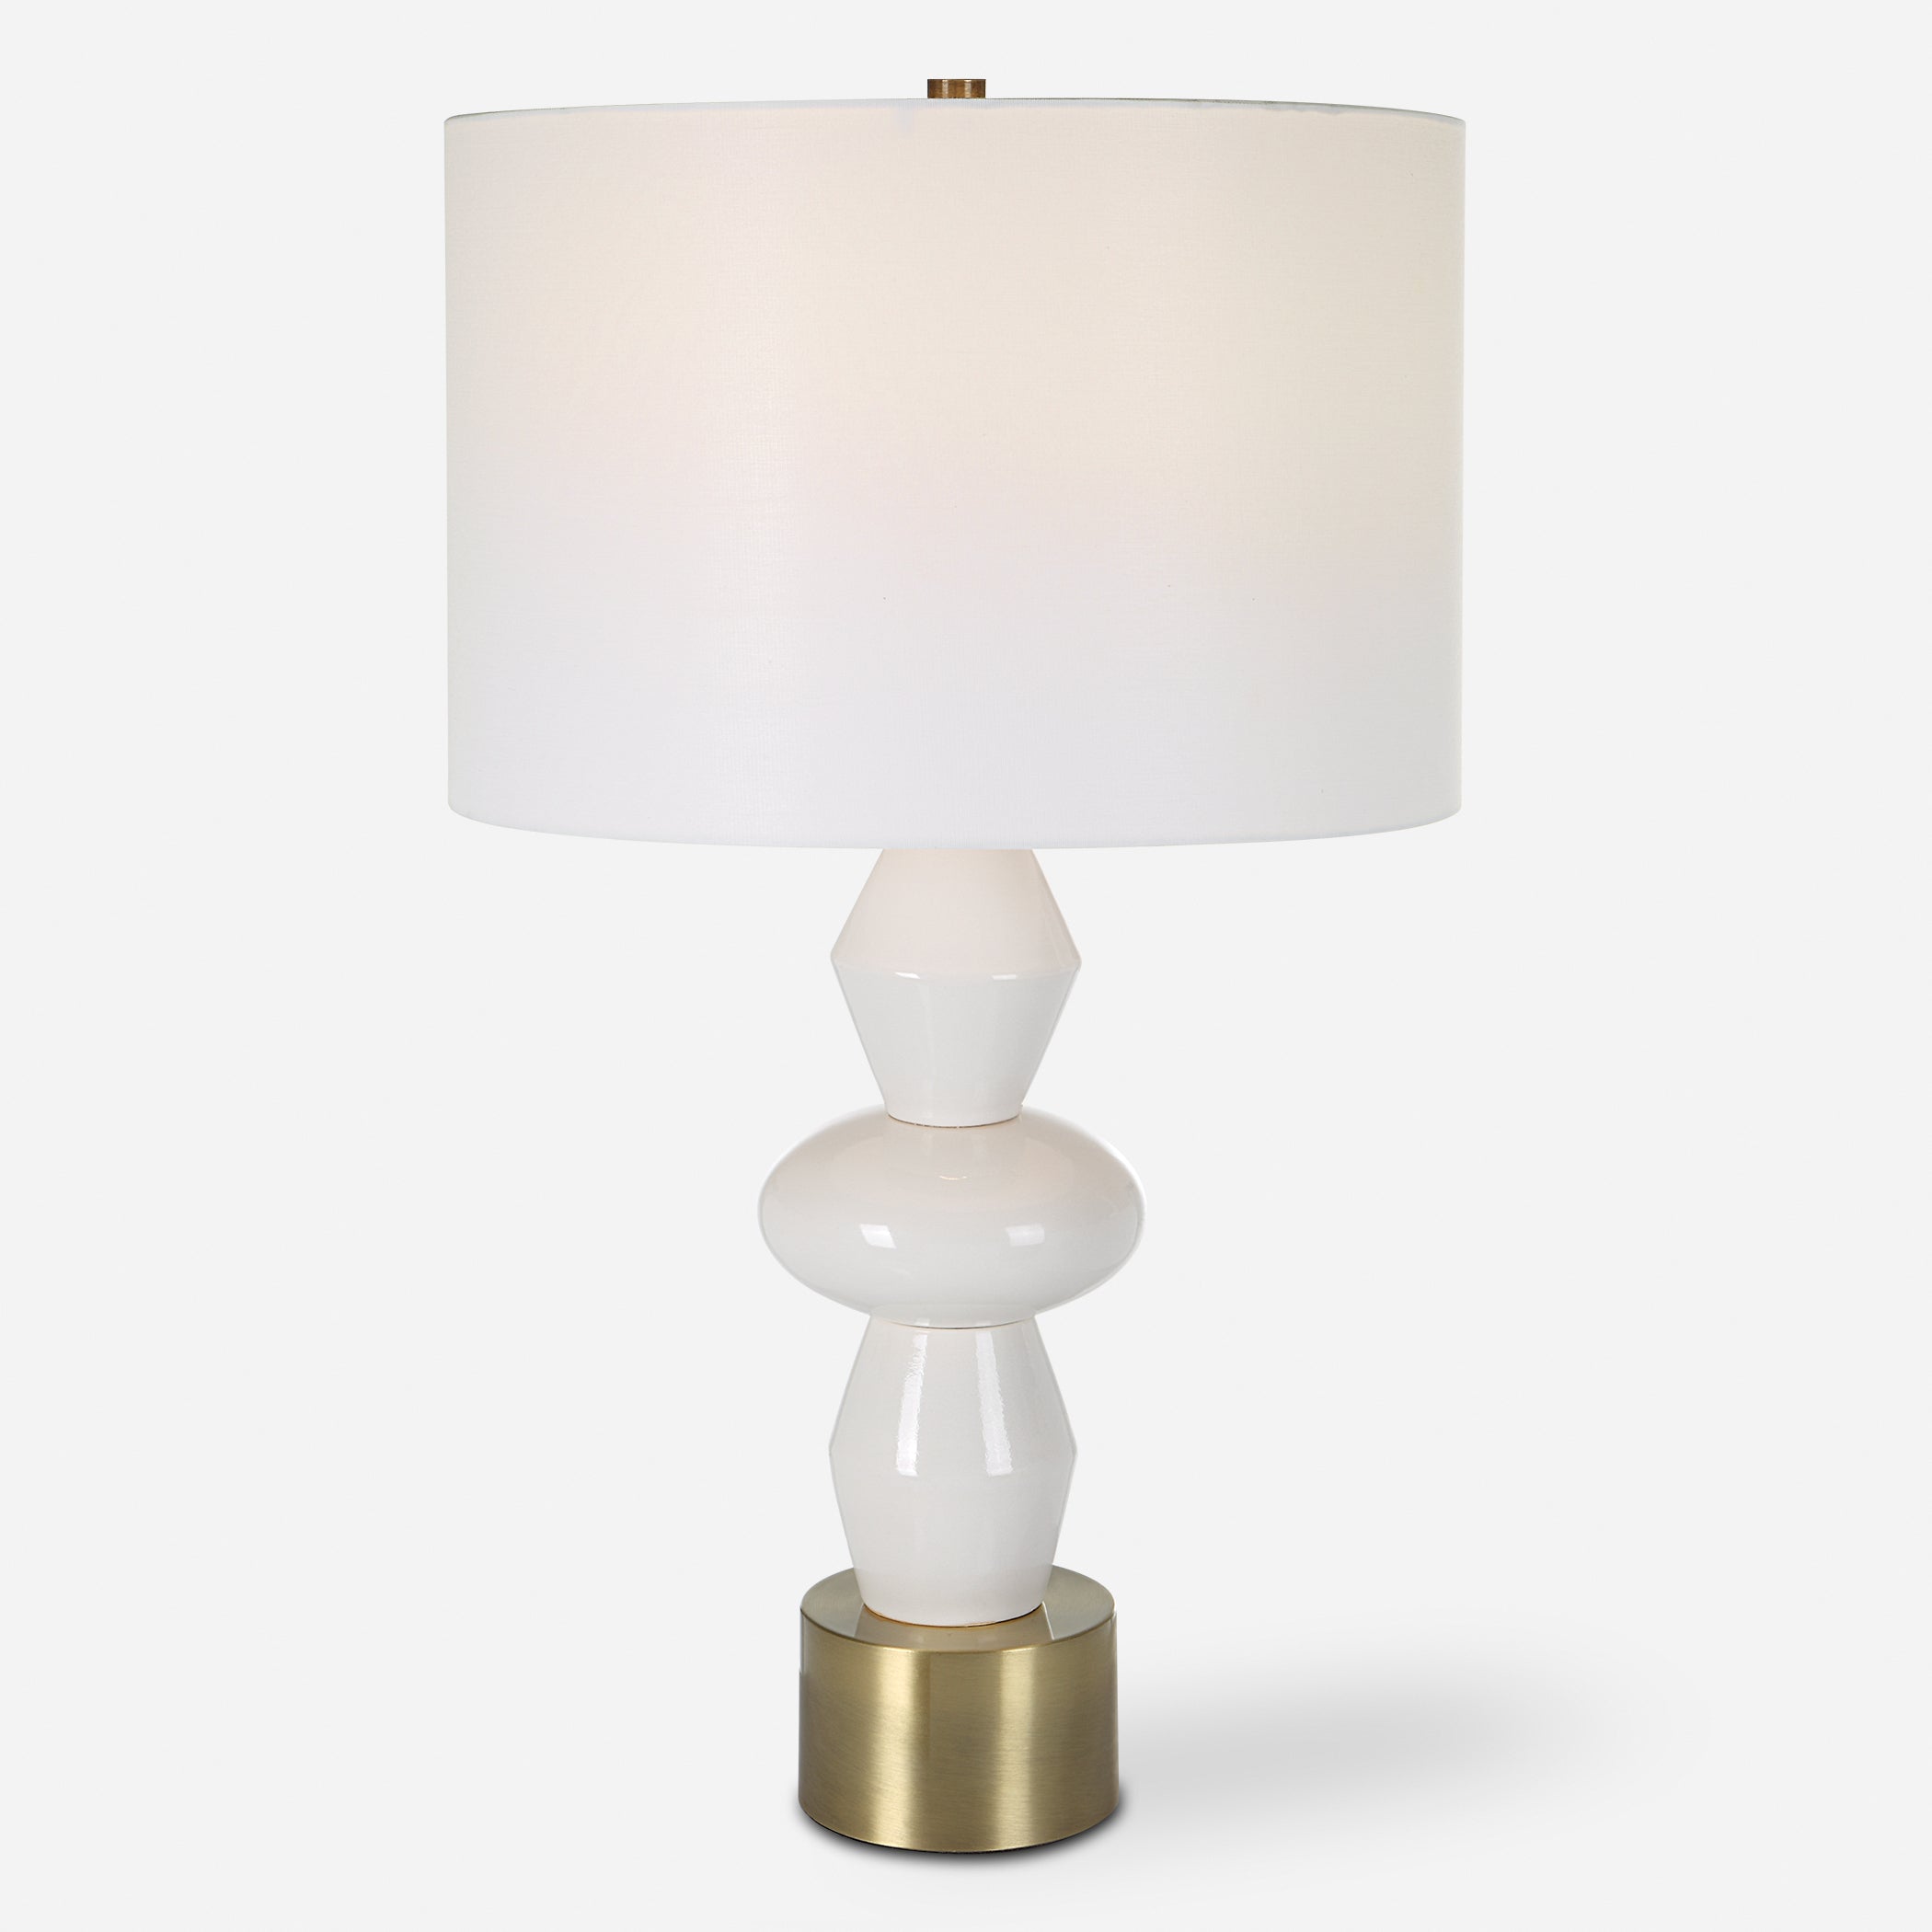 Uttermost Architect Table Lamp Table Lamp Uttermost   